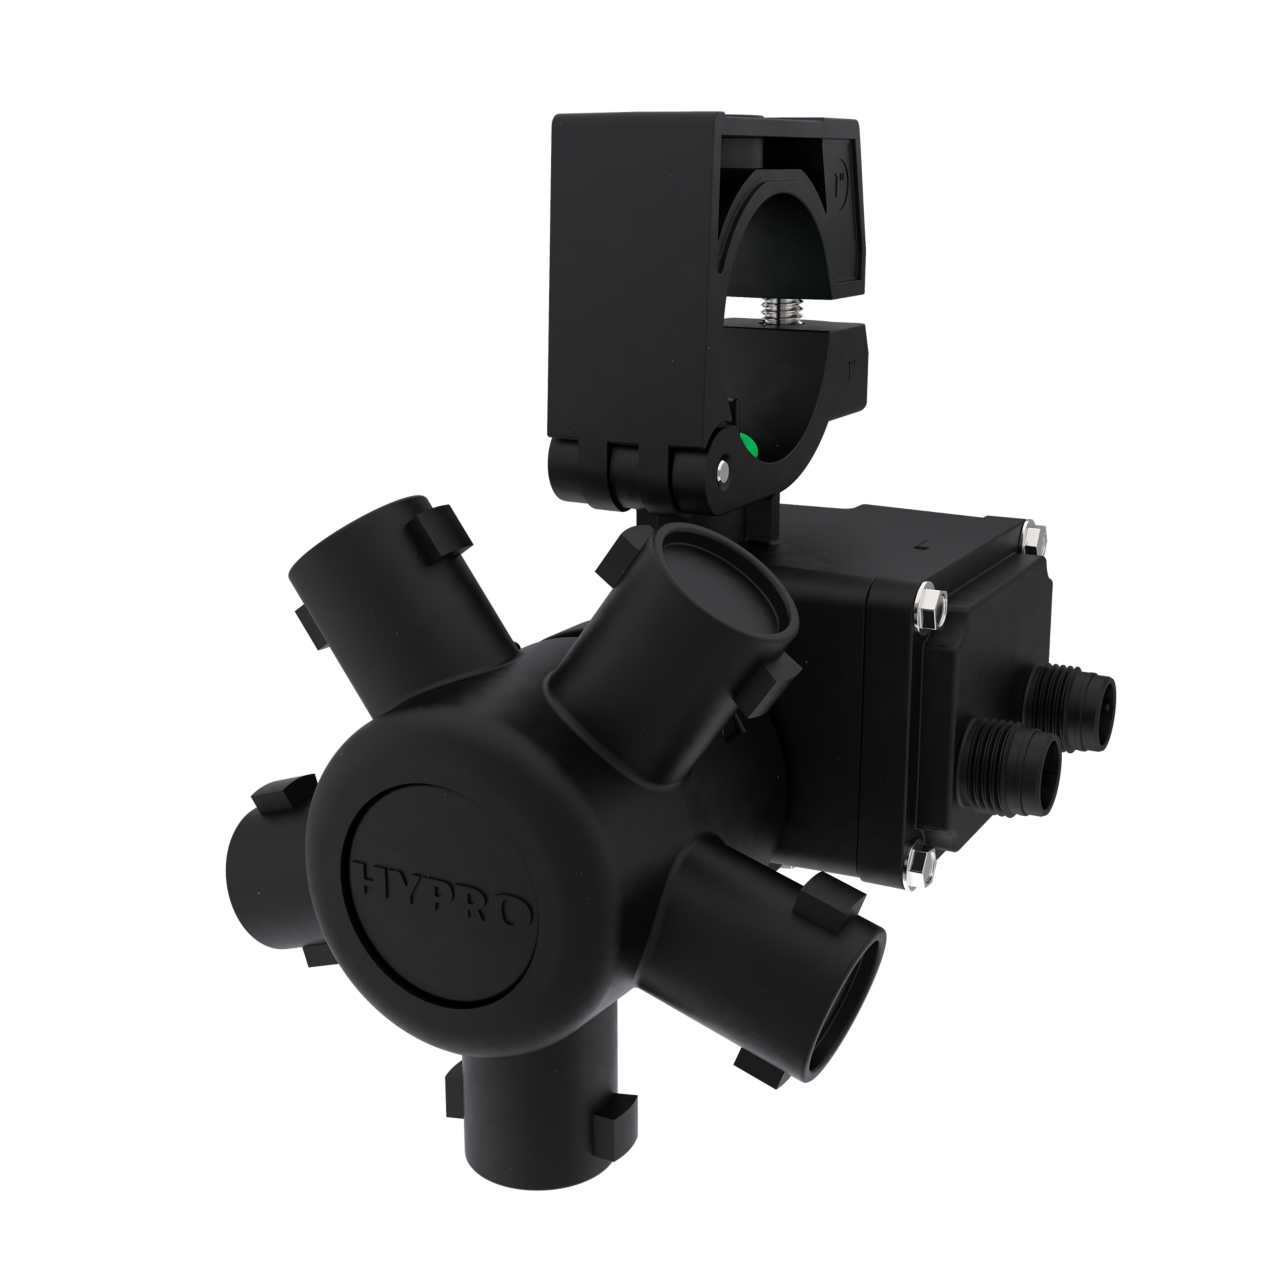 HYPRO PROSTOP-E SINGLE – Integrated with Turret